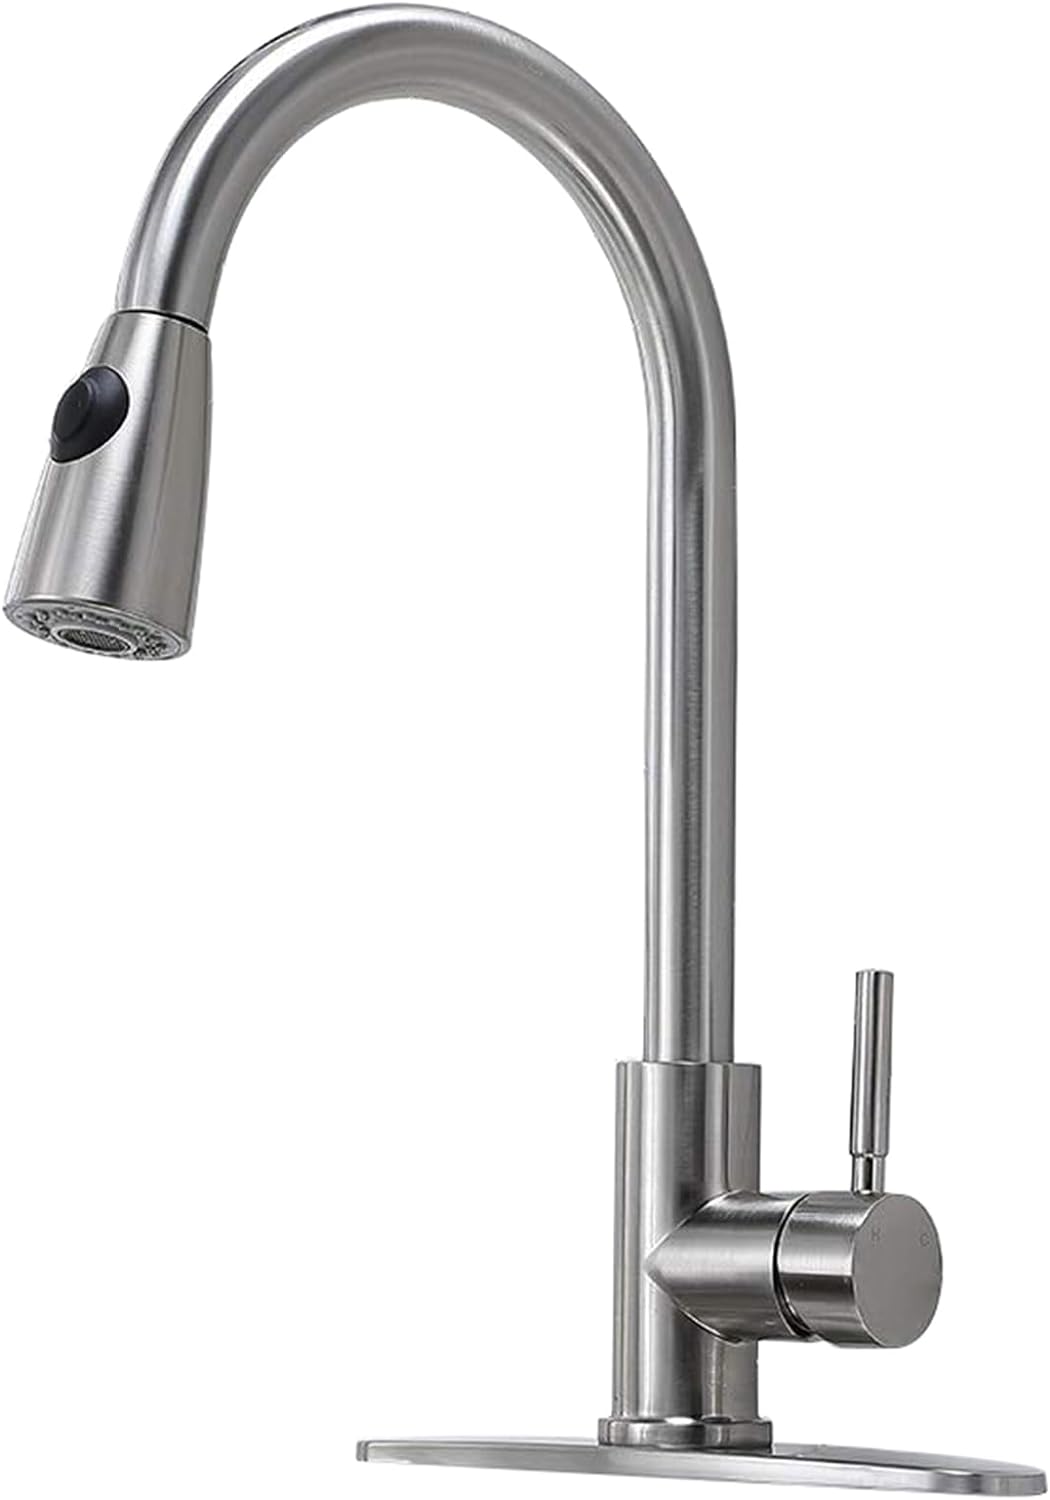 Kitchen Faucet with Pull Down Sprayers, Brushed Nickel Kitchen Faucets, Modern Pull Out Stainless Steel Kitchen Sink Faucet Single Handle Faucet Swivel Spout with Deck Plate